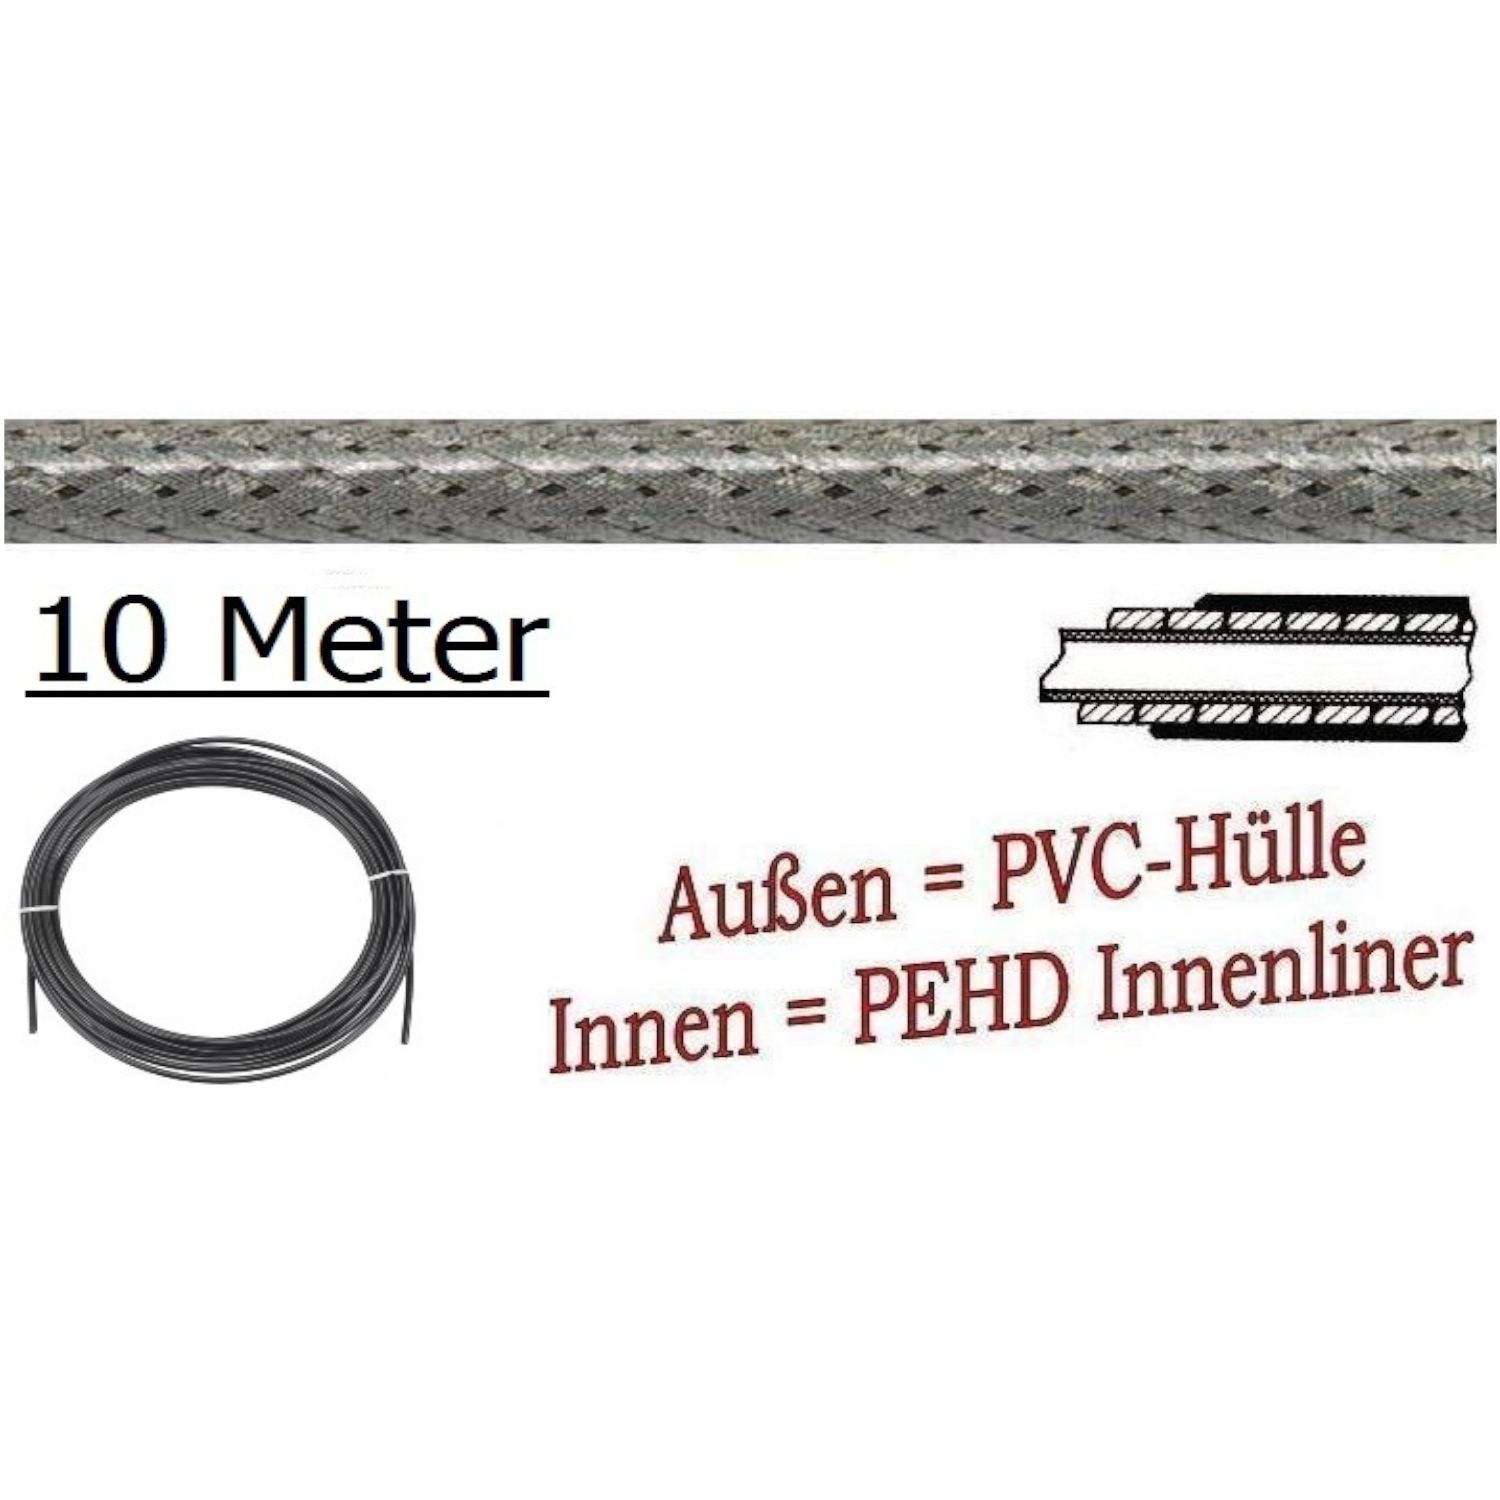 BREMS-Hülle 10 m-Rolle-DT40250010, TI-SILVER-BRAID, mit PE-HD-Innenliner